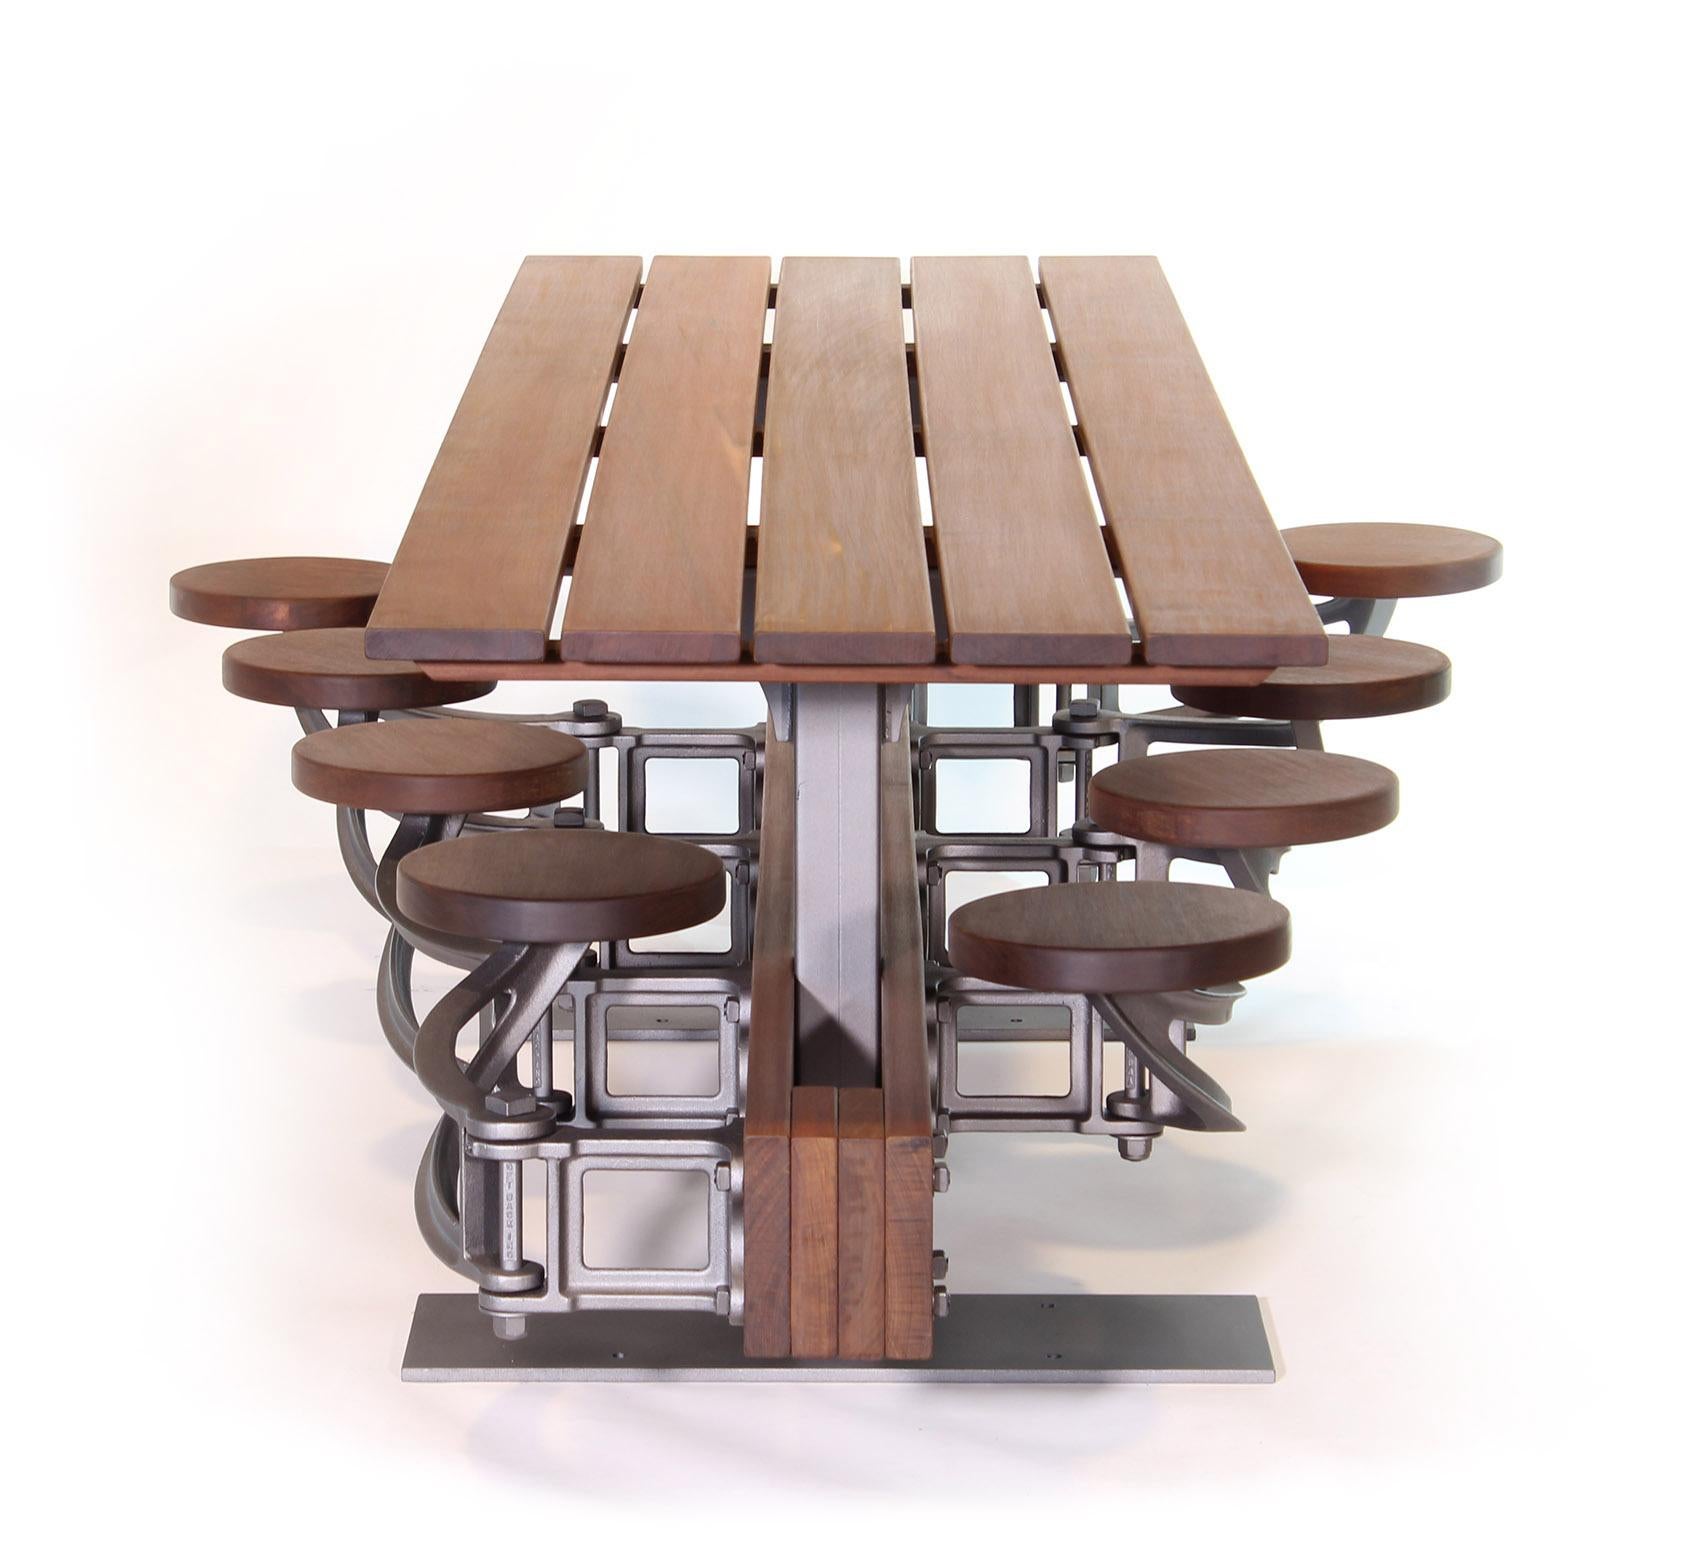 Swing-Out-Seat Outdoor Dining Table Set 8